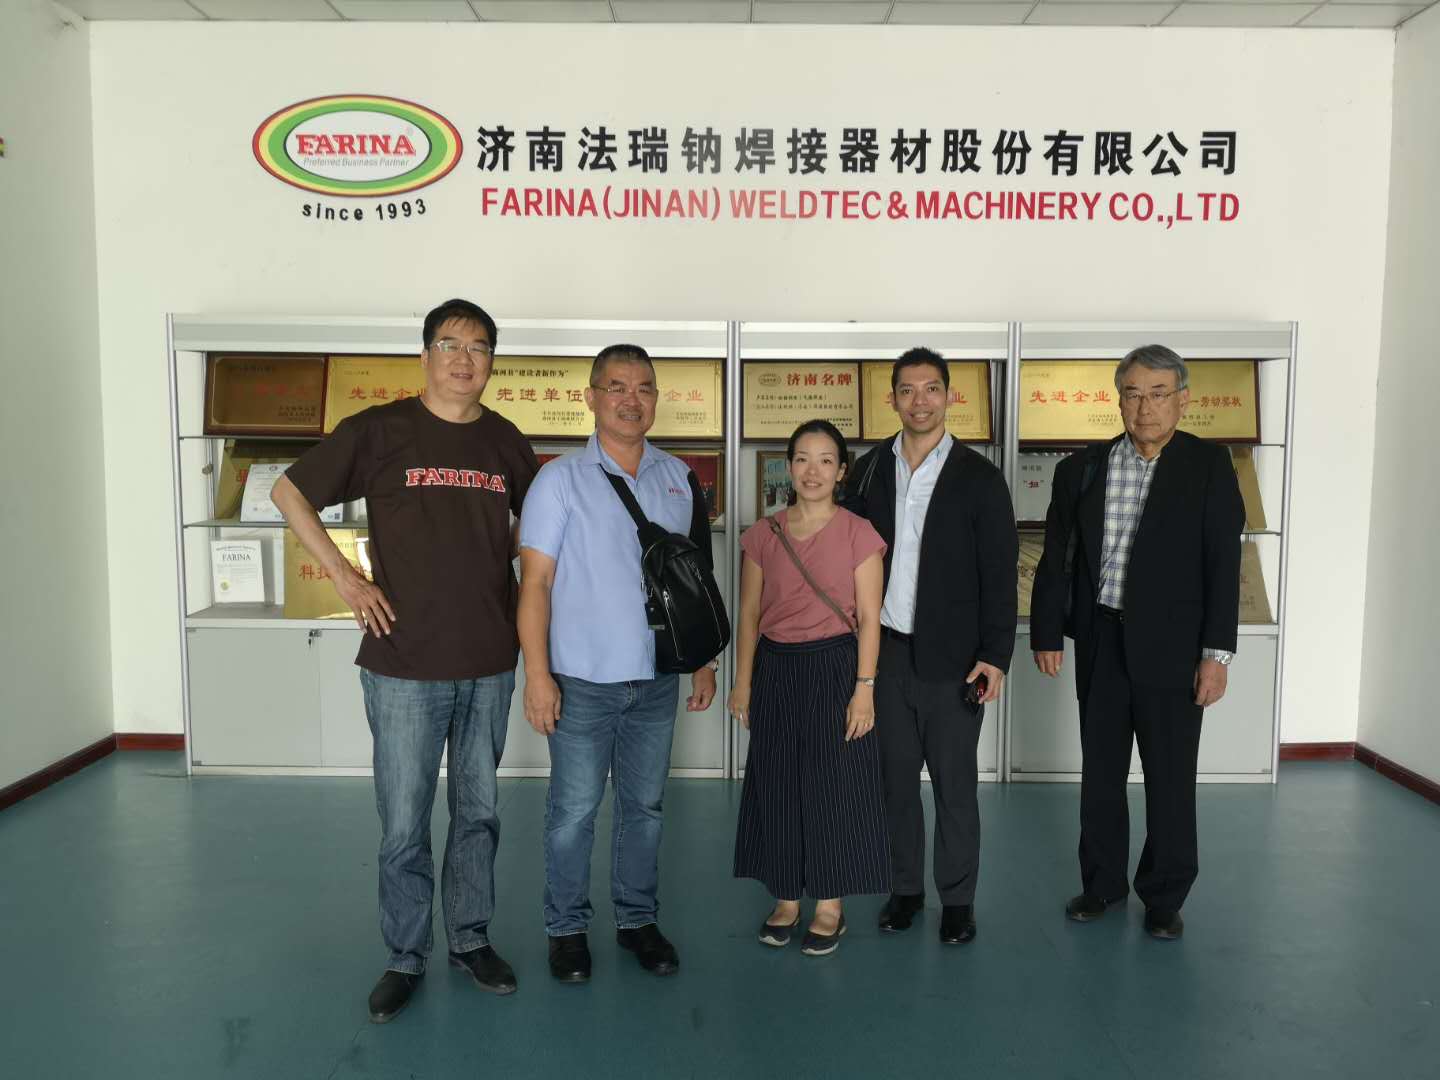 Welcome customers from Malaysia and Thailand to visit our FARINA company